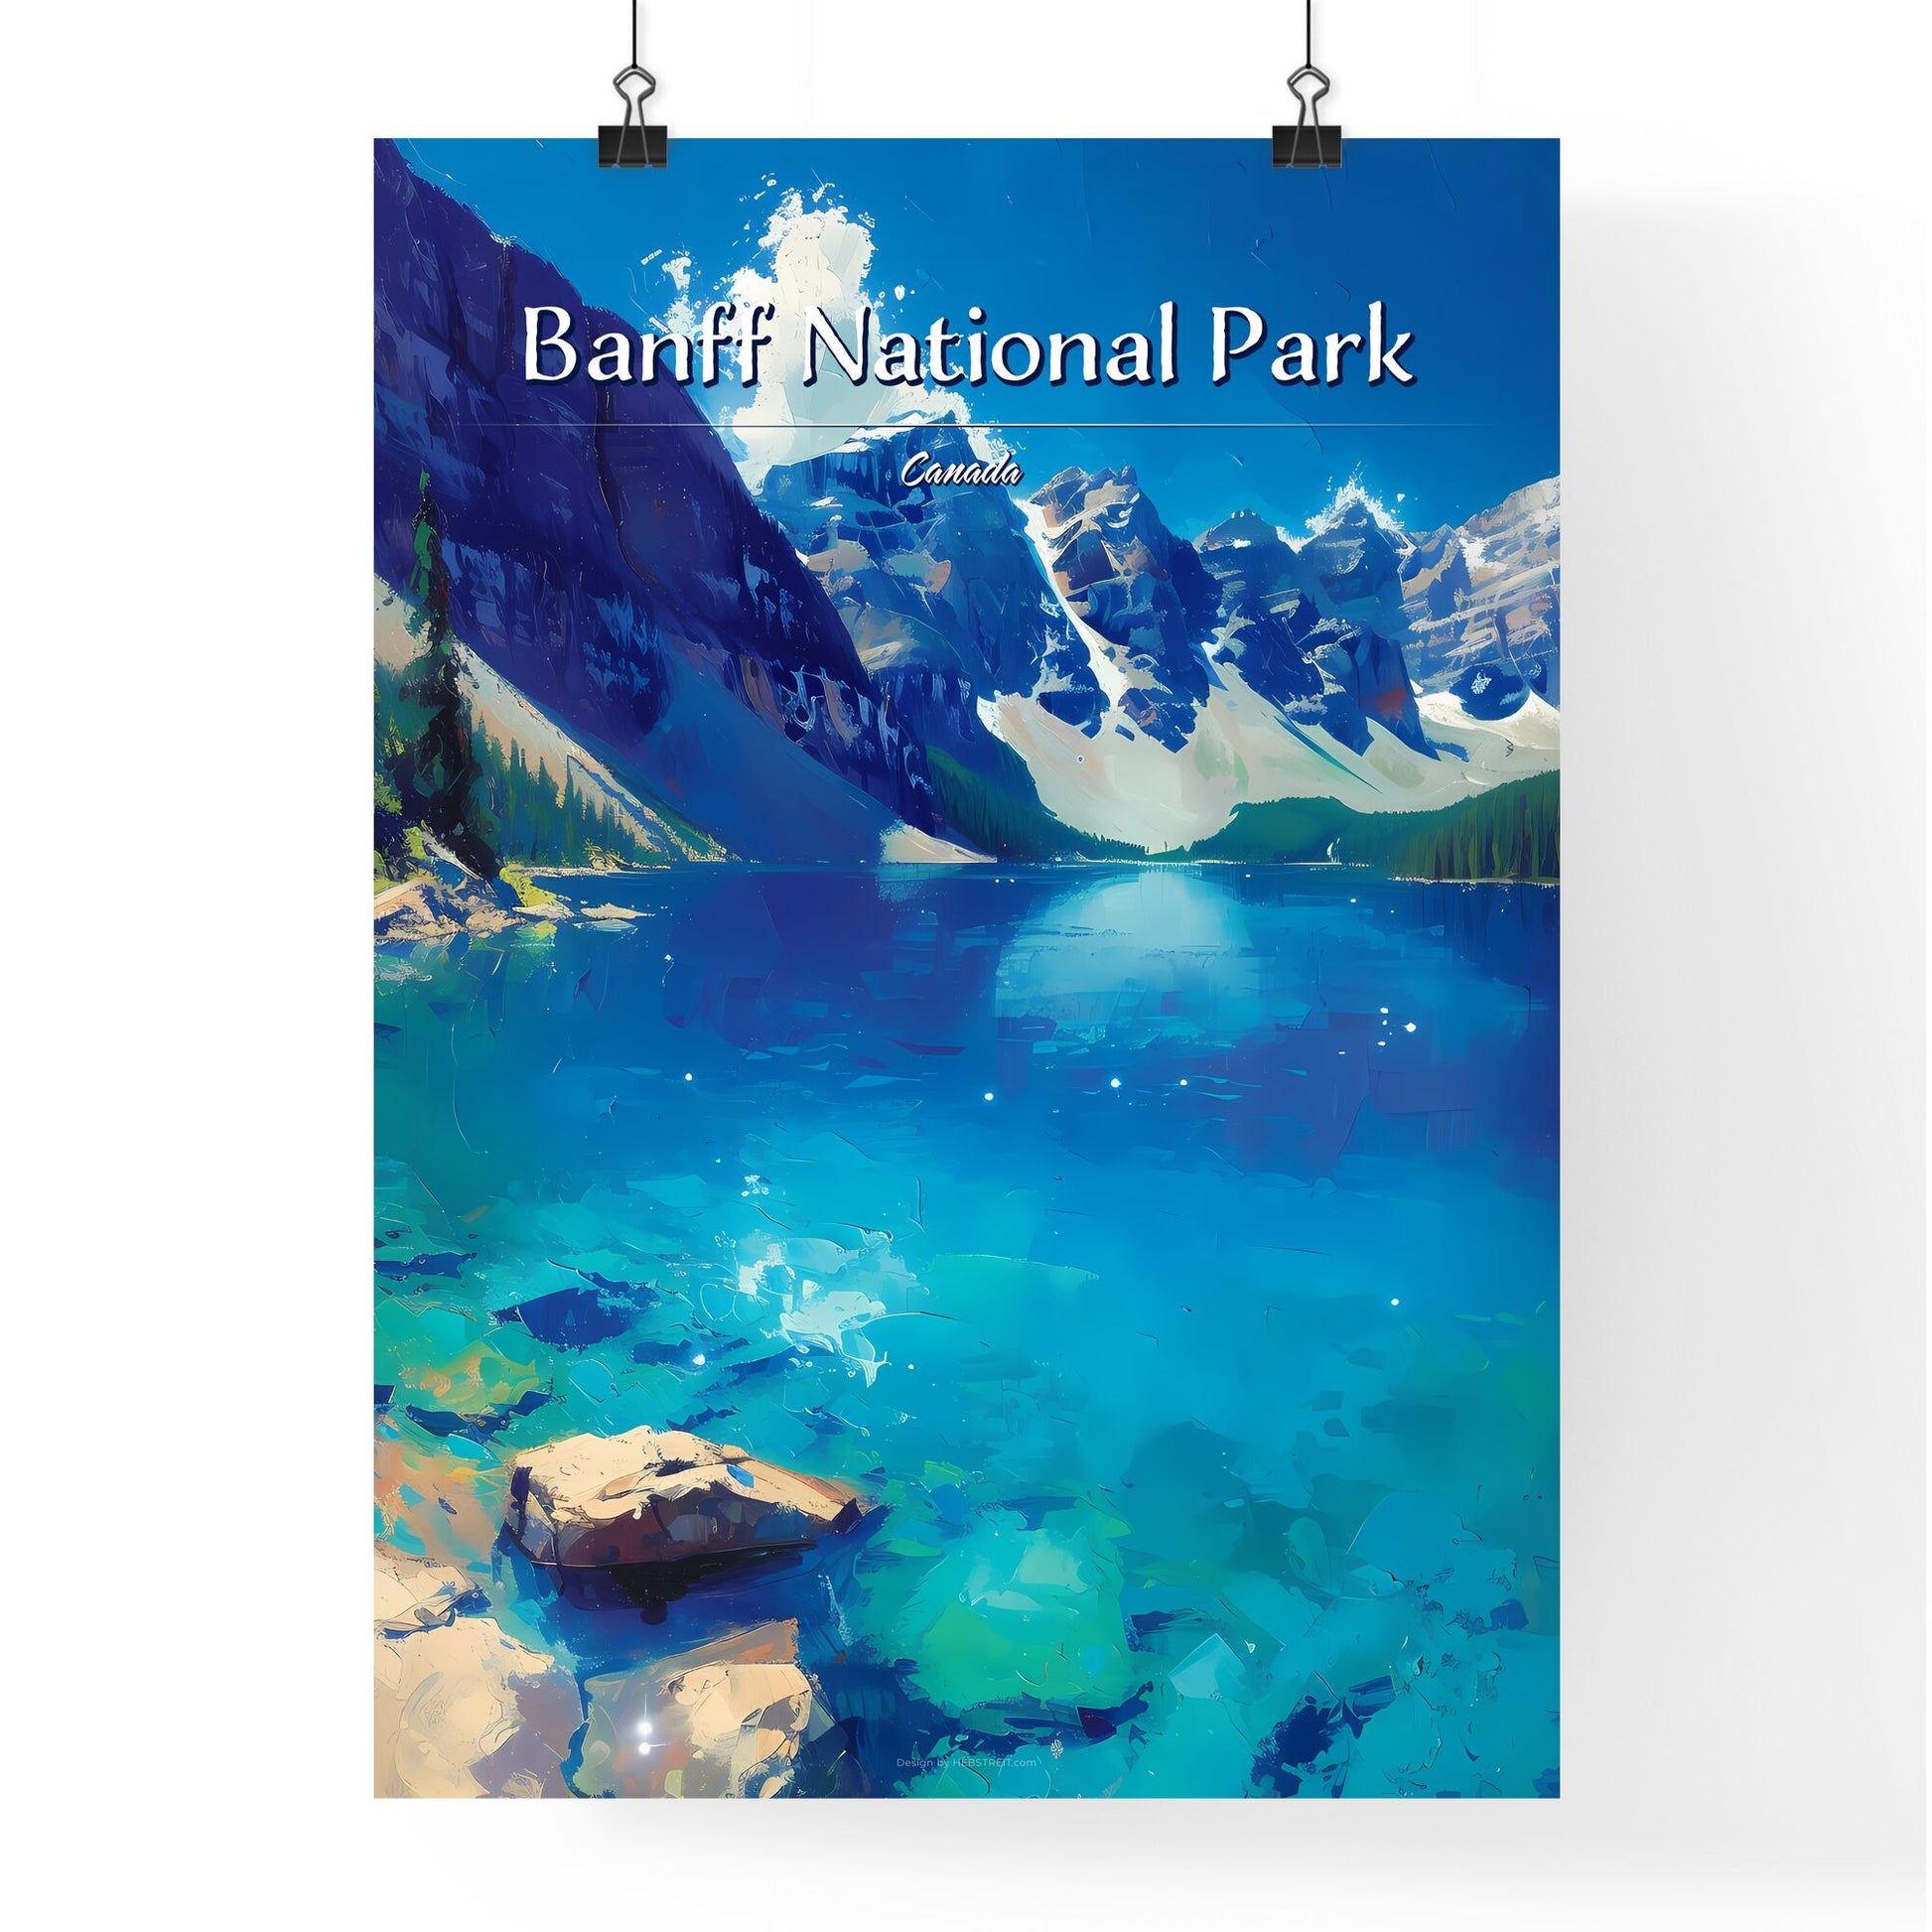 Banff National Park, Canada - Art print of a lake with mountains in the background Default Title